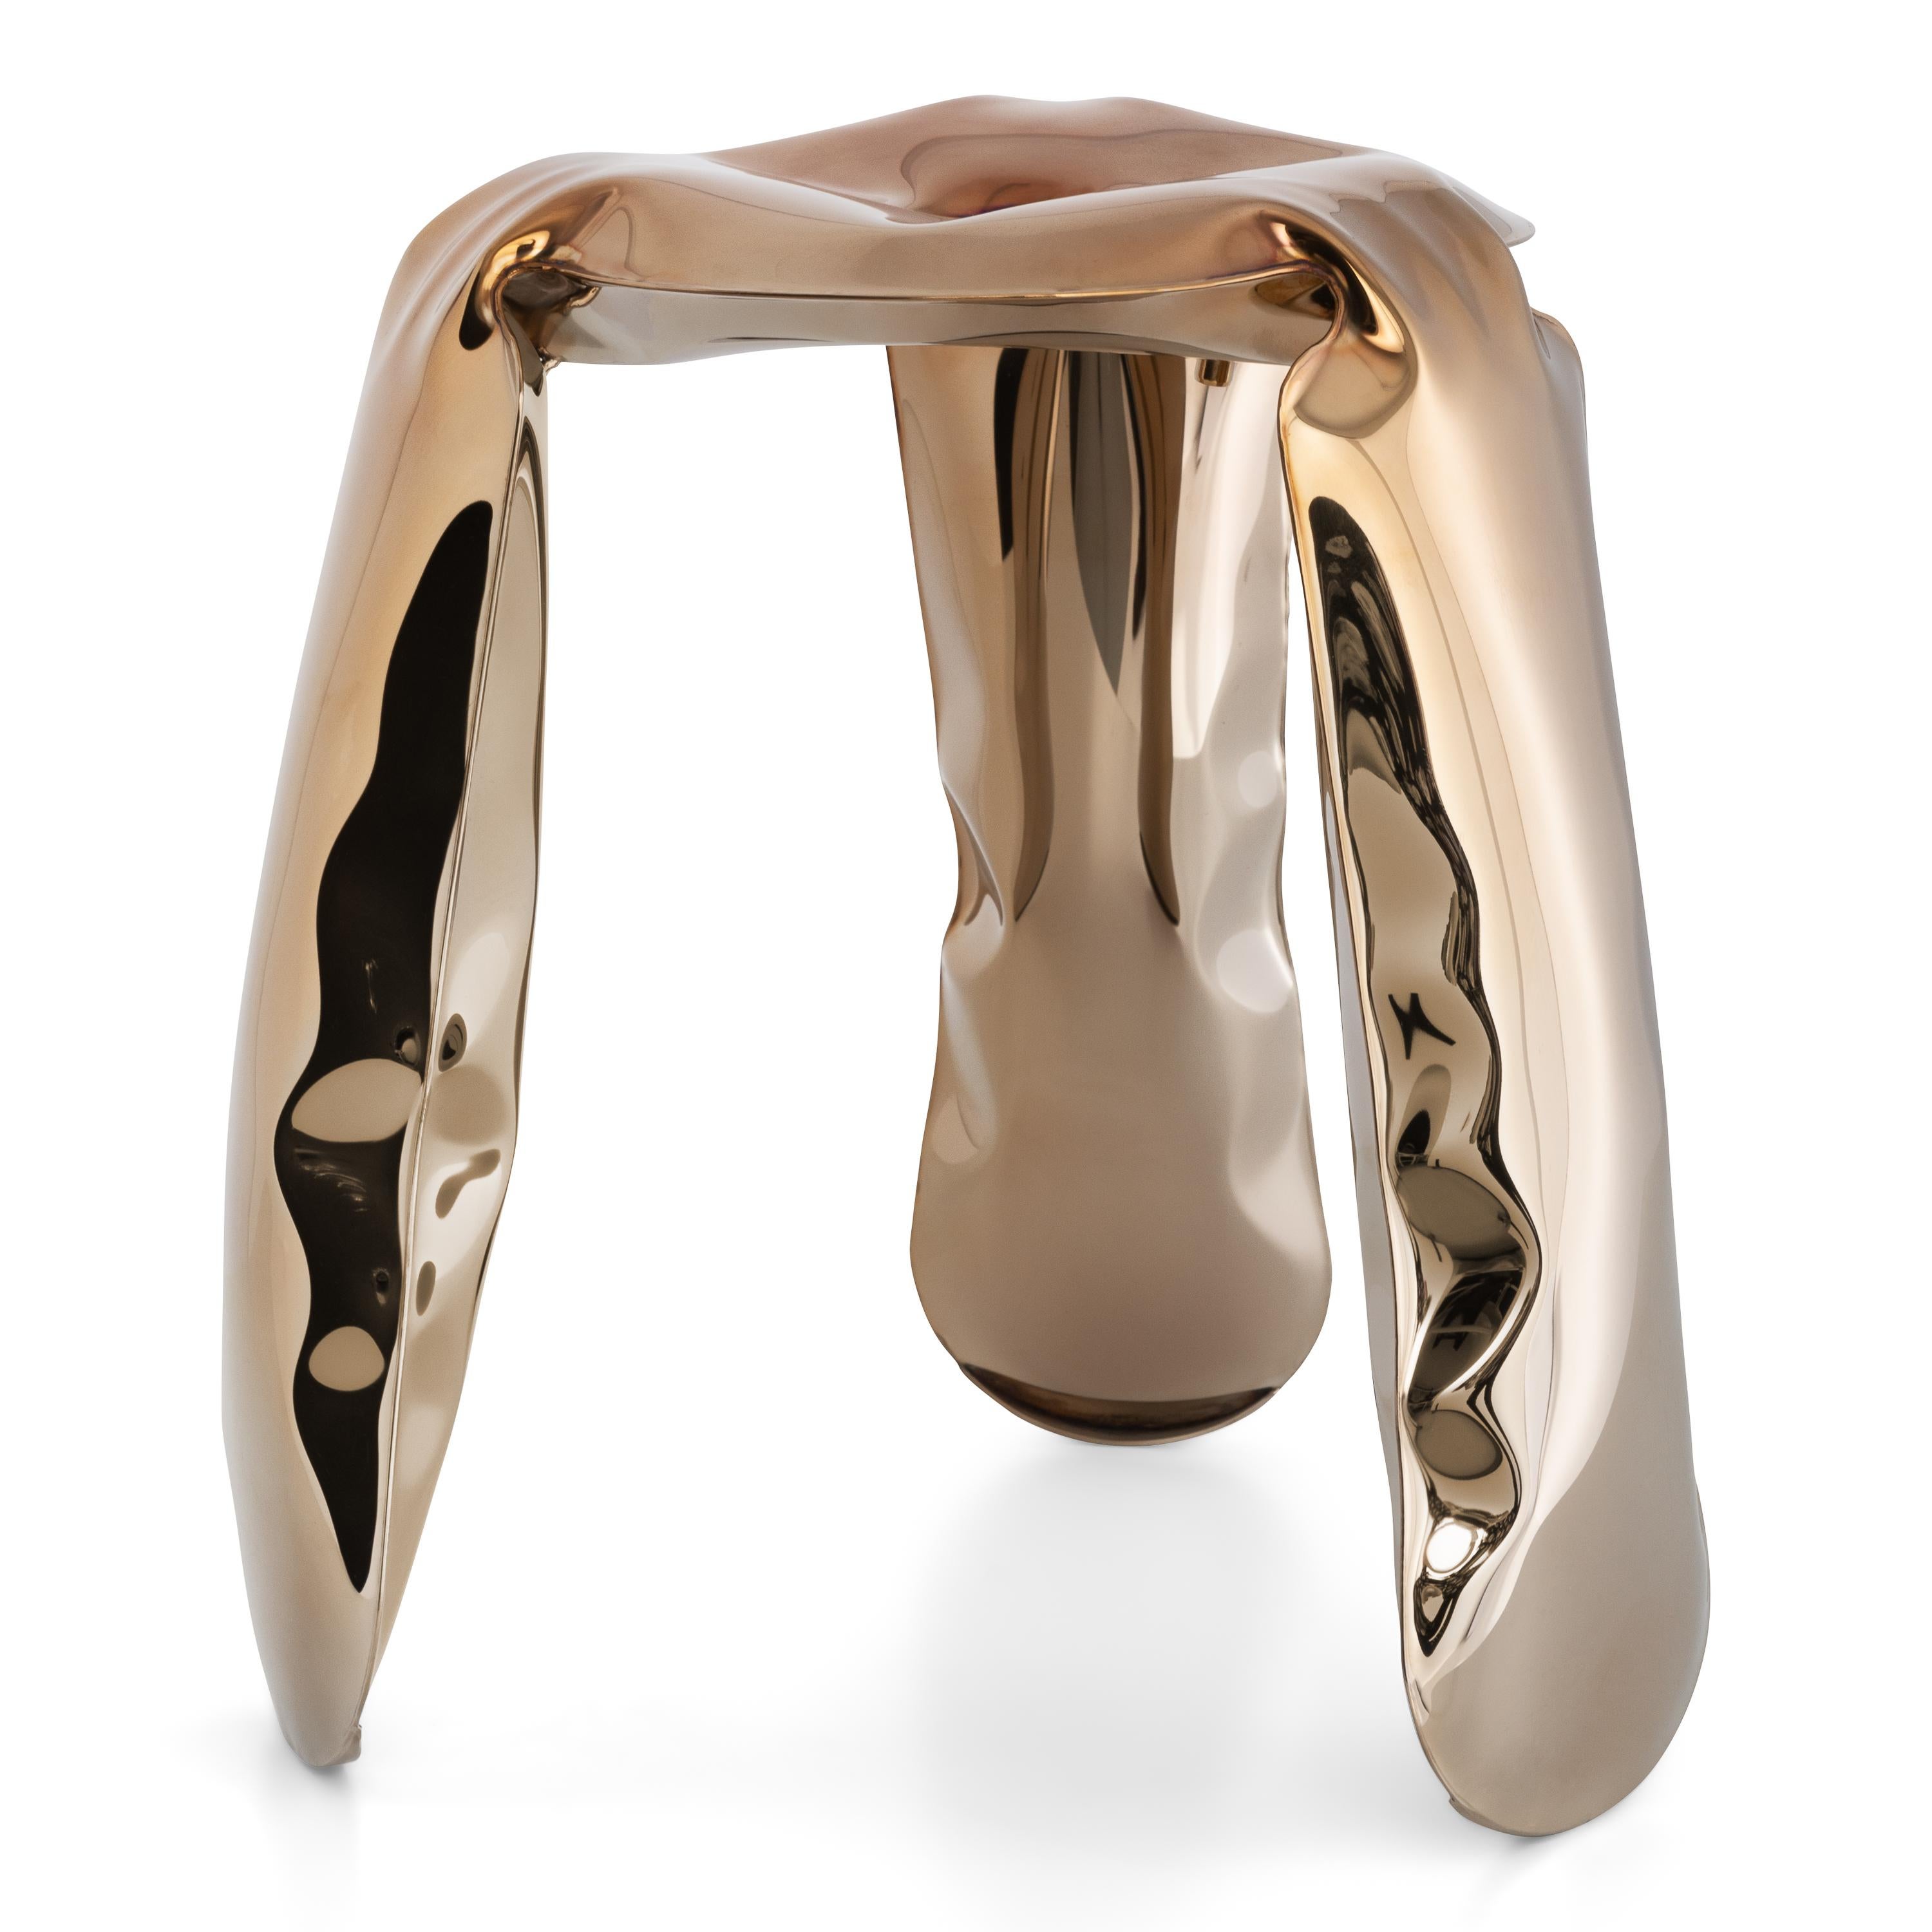 Flamed gold mini plopp stool by Zieta
Dimensions: Diameter 25 x Height 38 cm 
Material: Stainless steel, carbon Steel. 
Finish: Thermal colored. Flamed Gold. 
Available in colors: Flamed Gold and Cosmic Blue. Available in stainless steel,